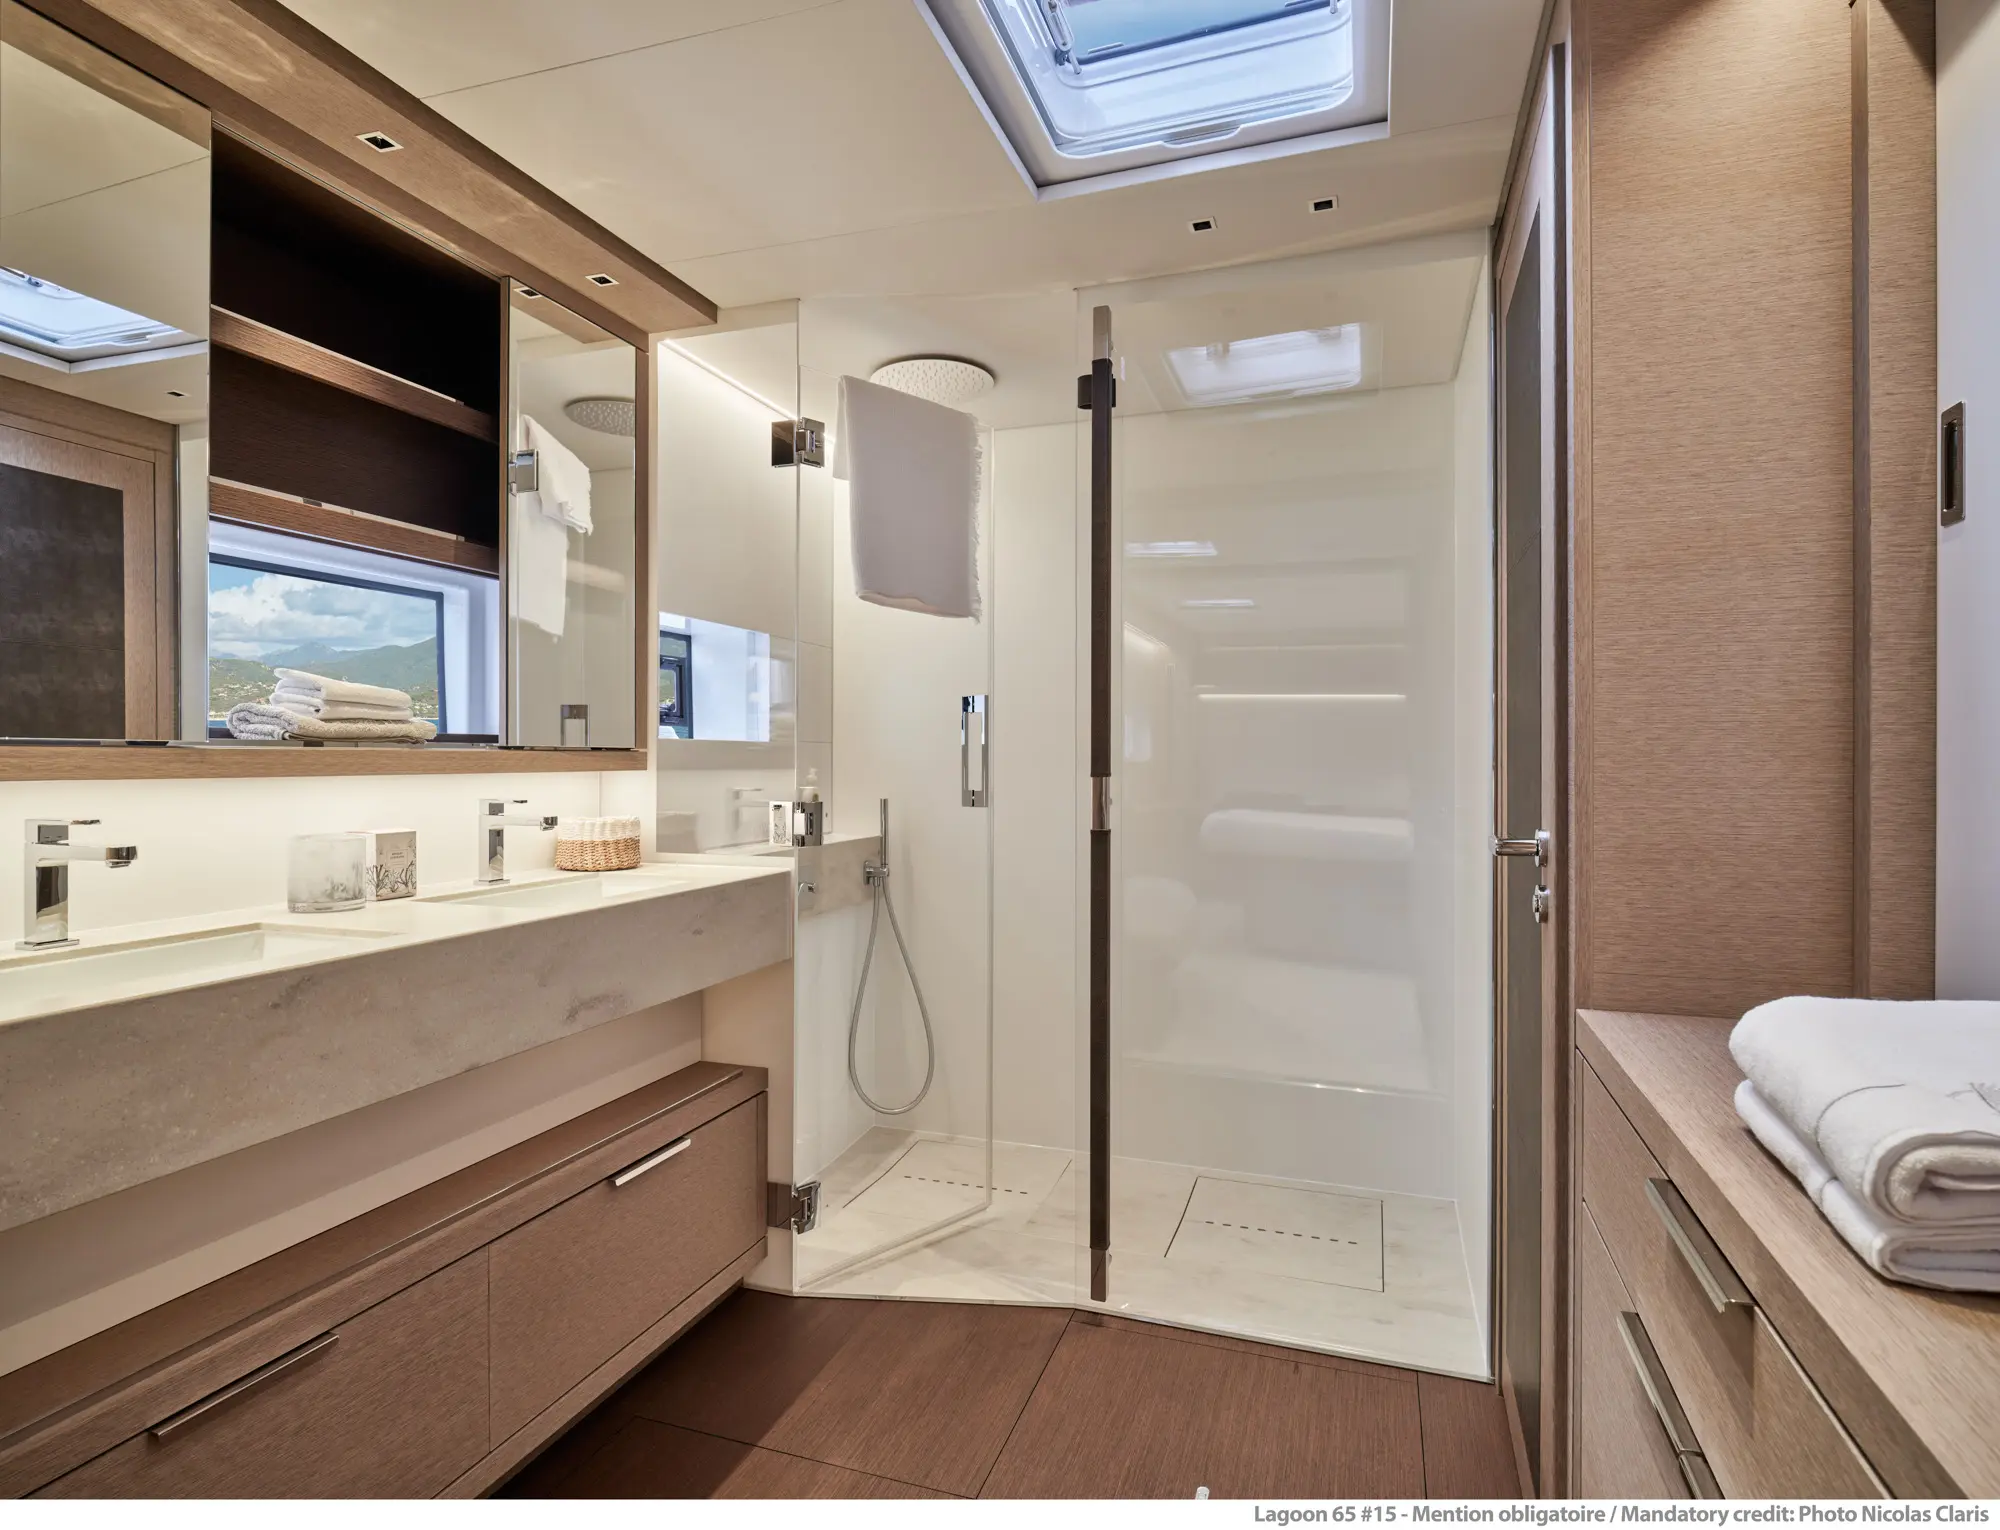 Seahome II ensuite bathroom with beautiful granite countertops, floor to ceiling glass showers, and towels